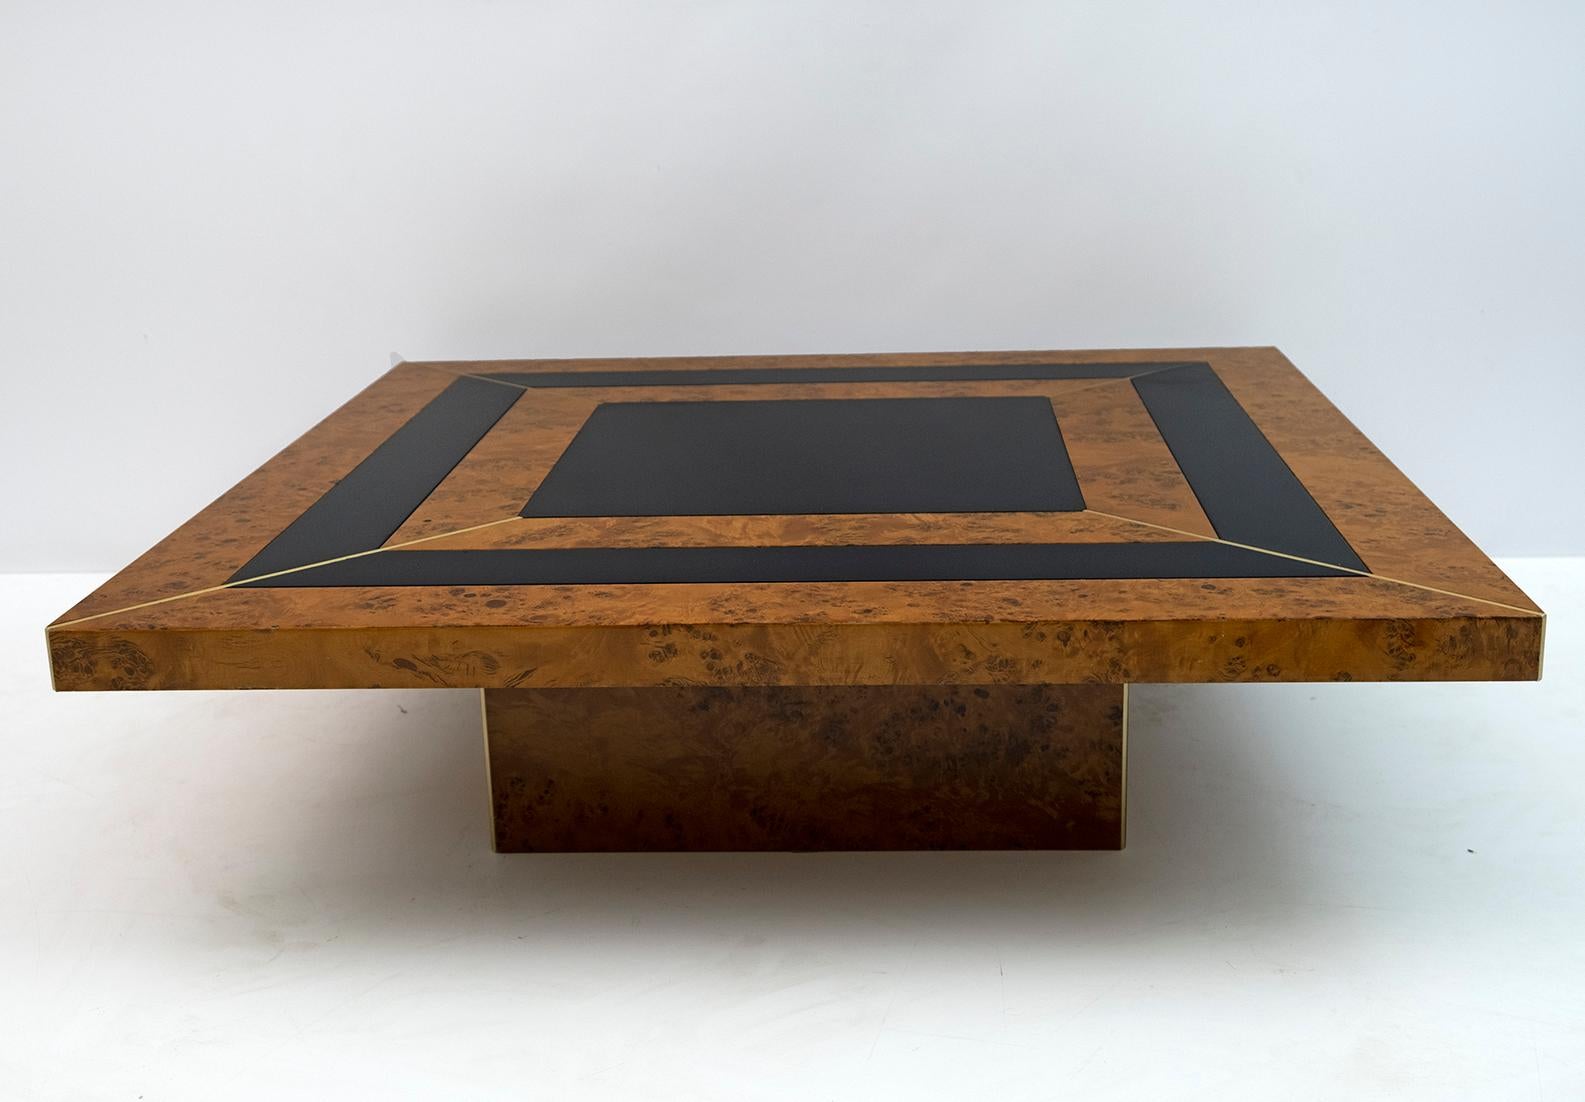 Excellent Italian Art Deco style coffee table. The base and the top are in walnut briar, while the top is inlaid in walnut briar with black lacquered decorations and brass inserts.